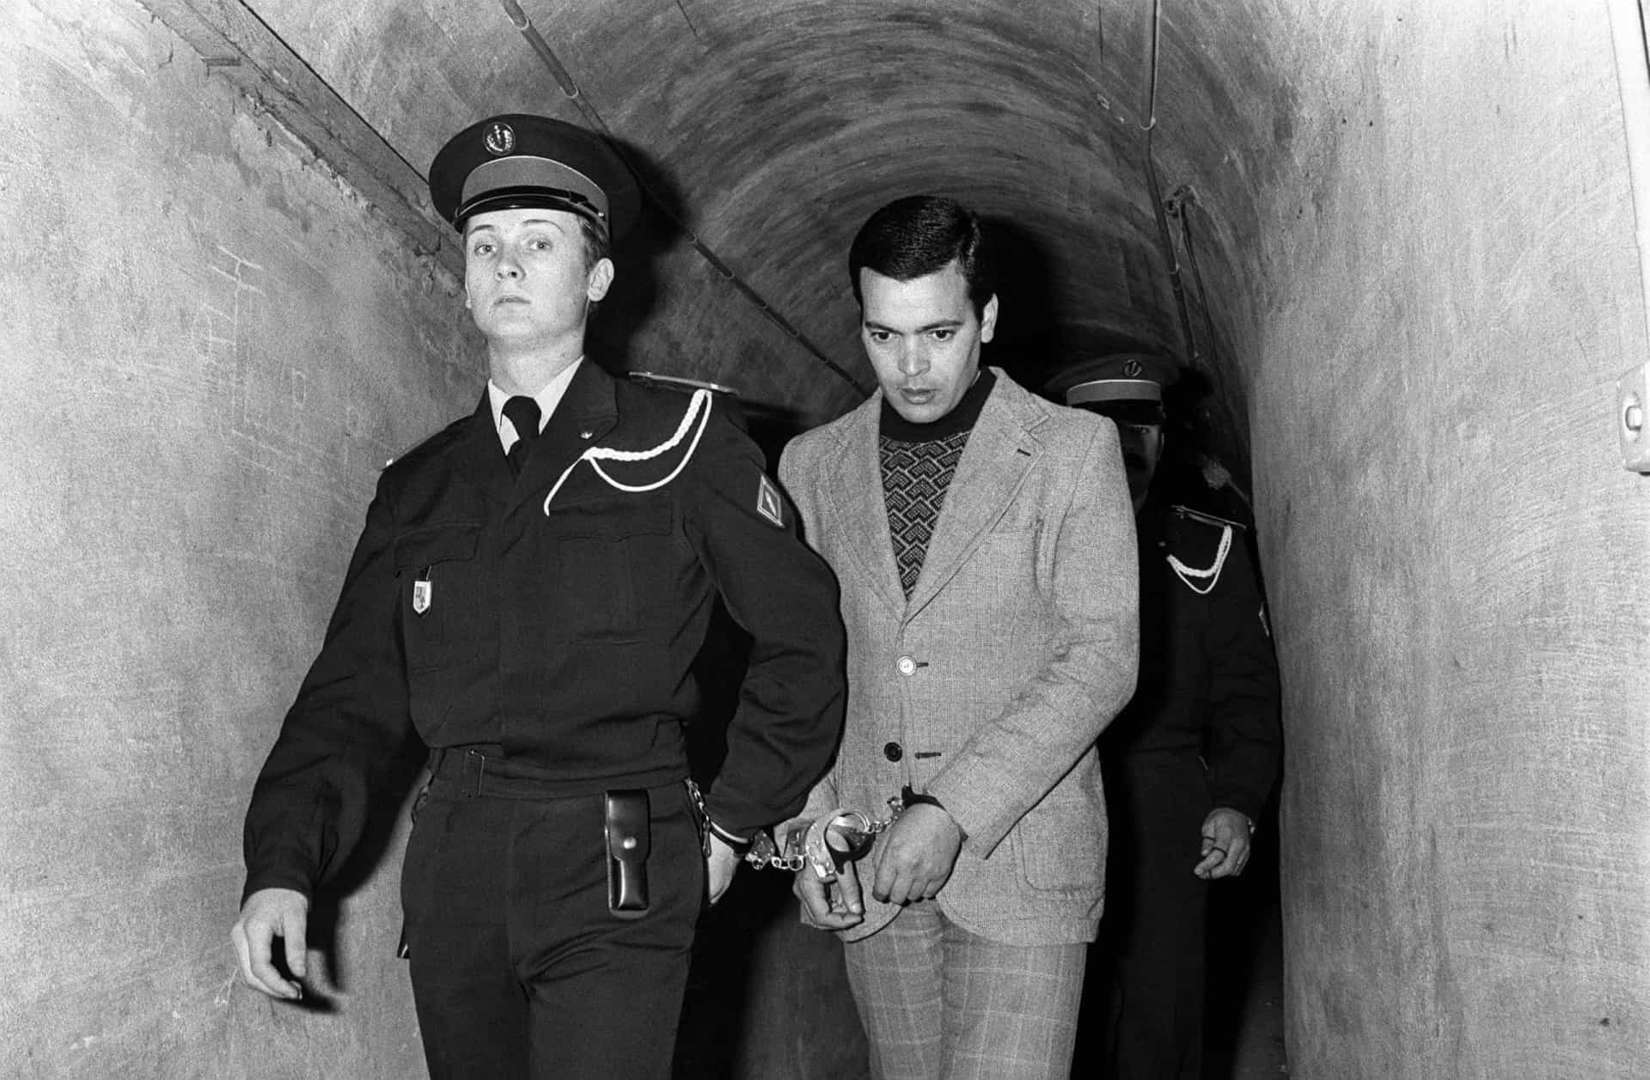 Slide 27 of 30 Tunisian national Hamida Djandoubi was the last person to be lawfully guillotined anywhere in the Western world The convicted murderer was executed on September 10 1977 at Baumettes Prison in Marseille France